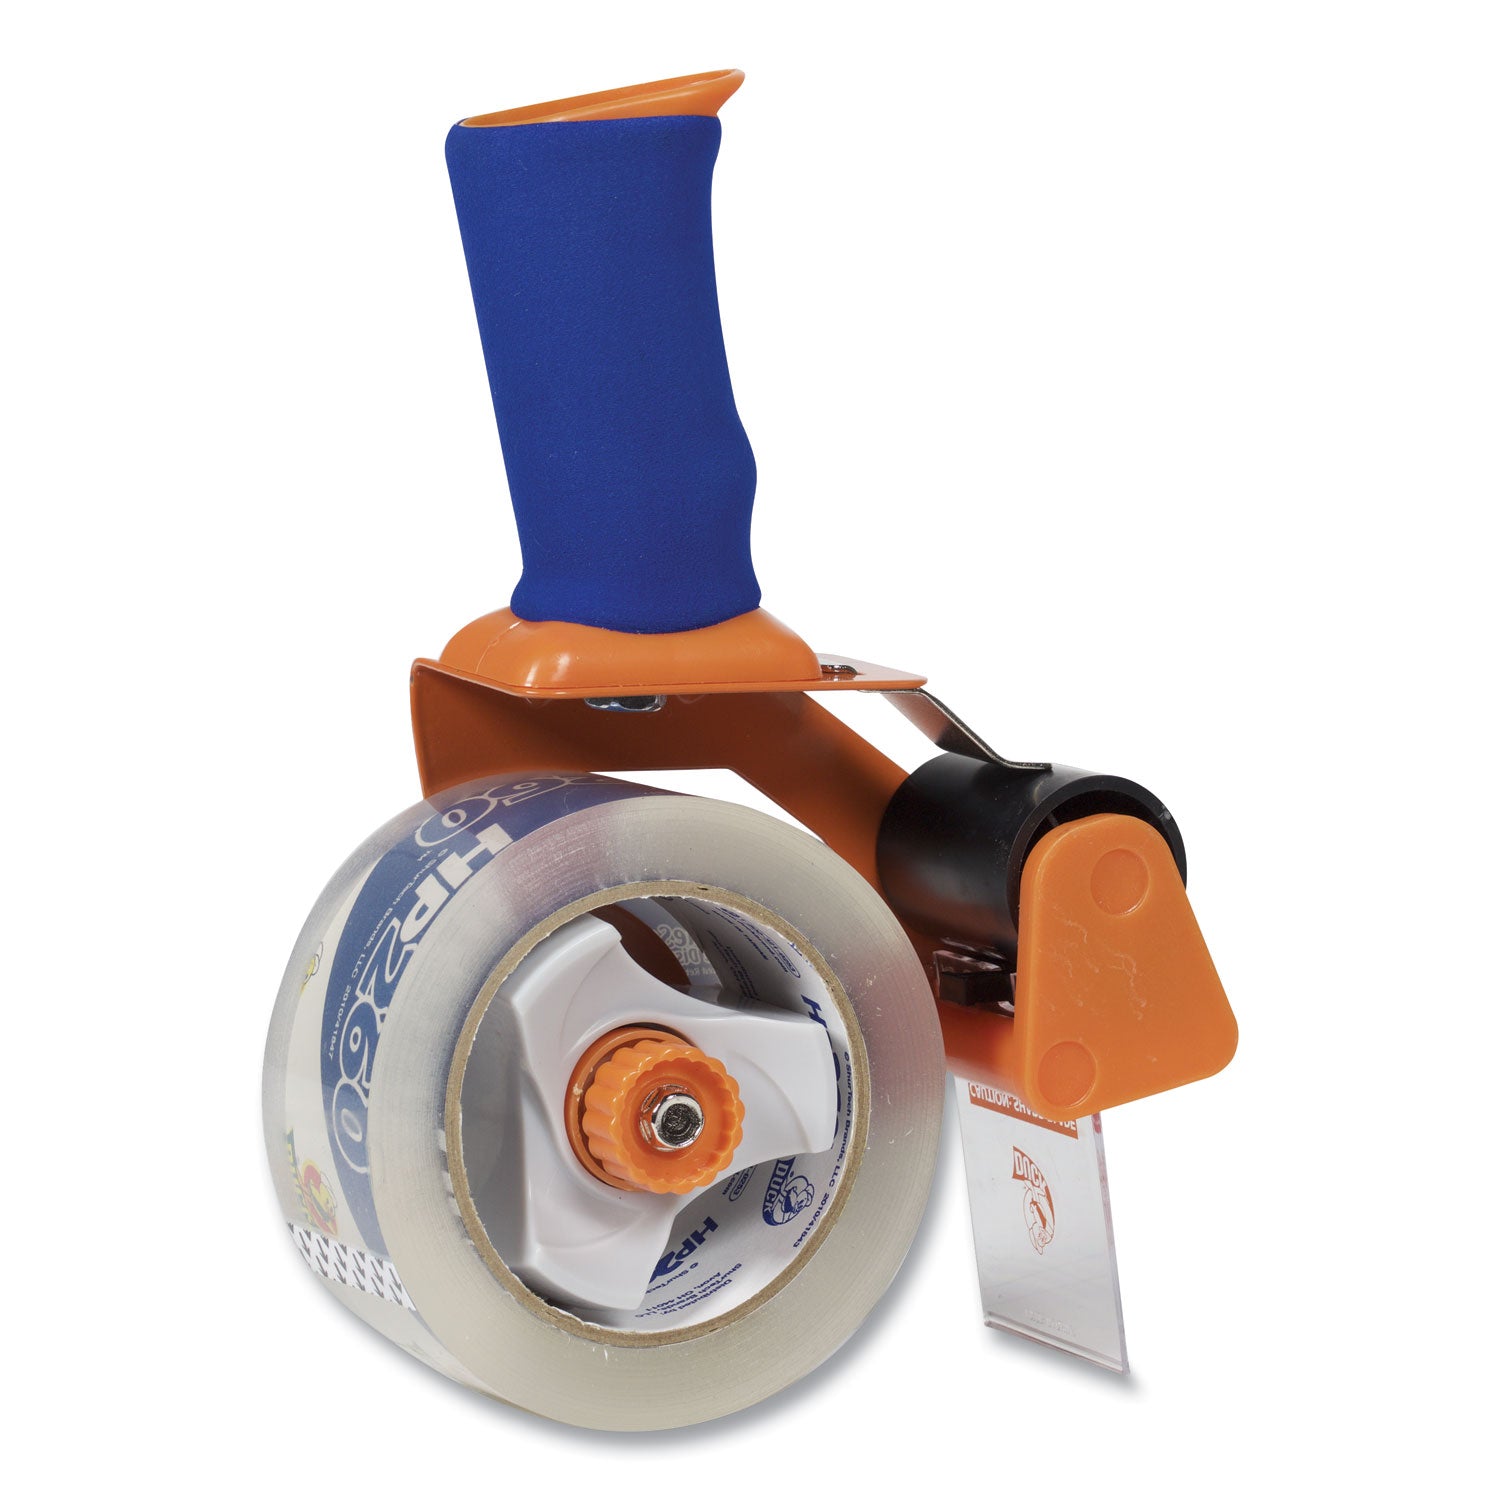 Bladesafe Antimicrobial Tape Gun with One Roll of Tape, 3" Core, For Rolls Up to 2" x 60 yds, Orange - 